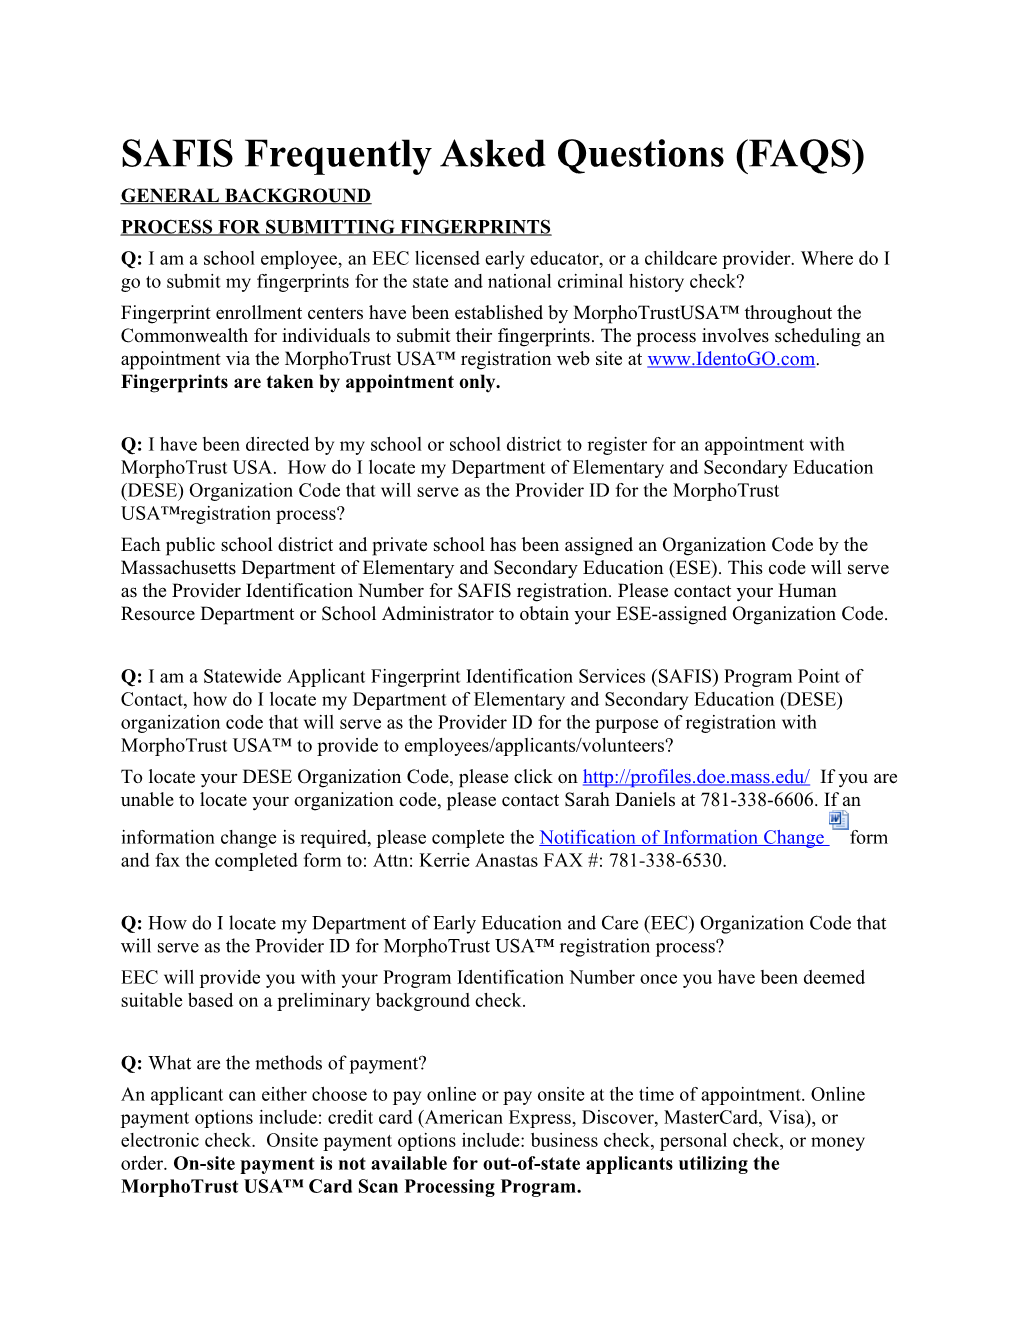 SAFIS Frequently Asked Questions (FAQS)